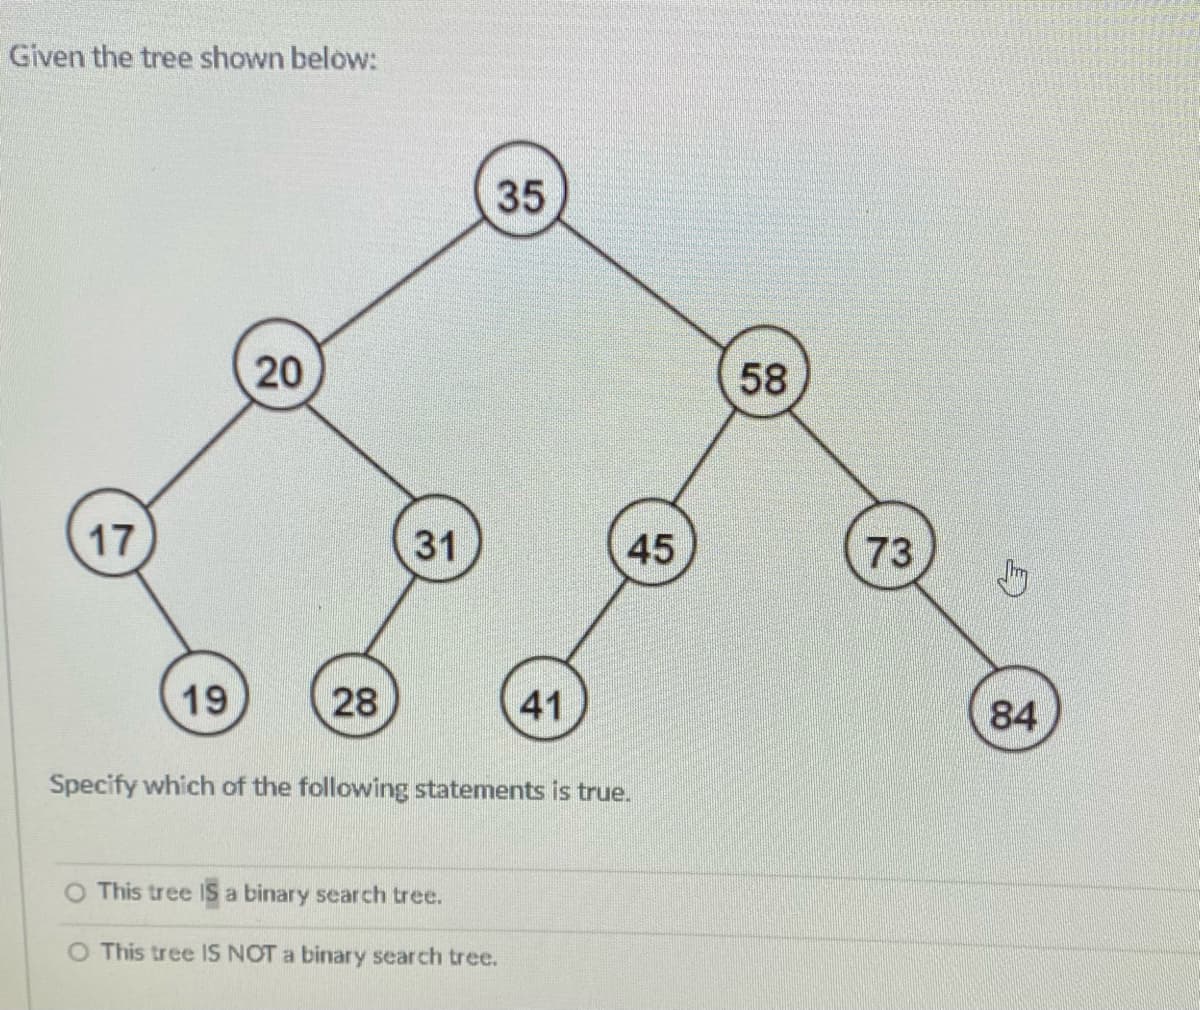 Given the tree shown below:
35
20
58
17
31
45
73
19
28
41
84
Specify which of the following statements is true.
O This tree IS a binary search tree.
O This tree IS NOT a binary search tree.
